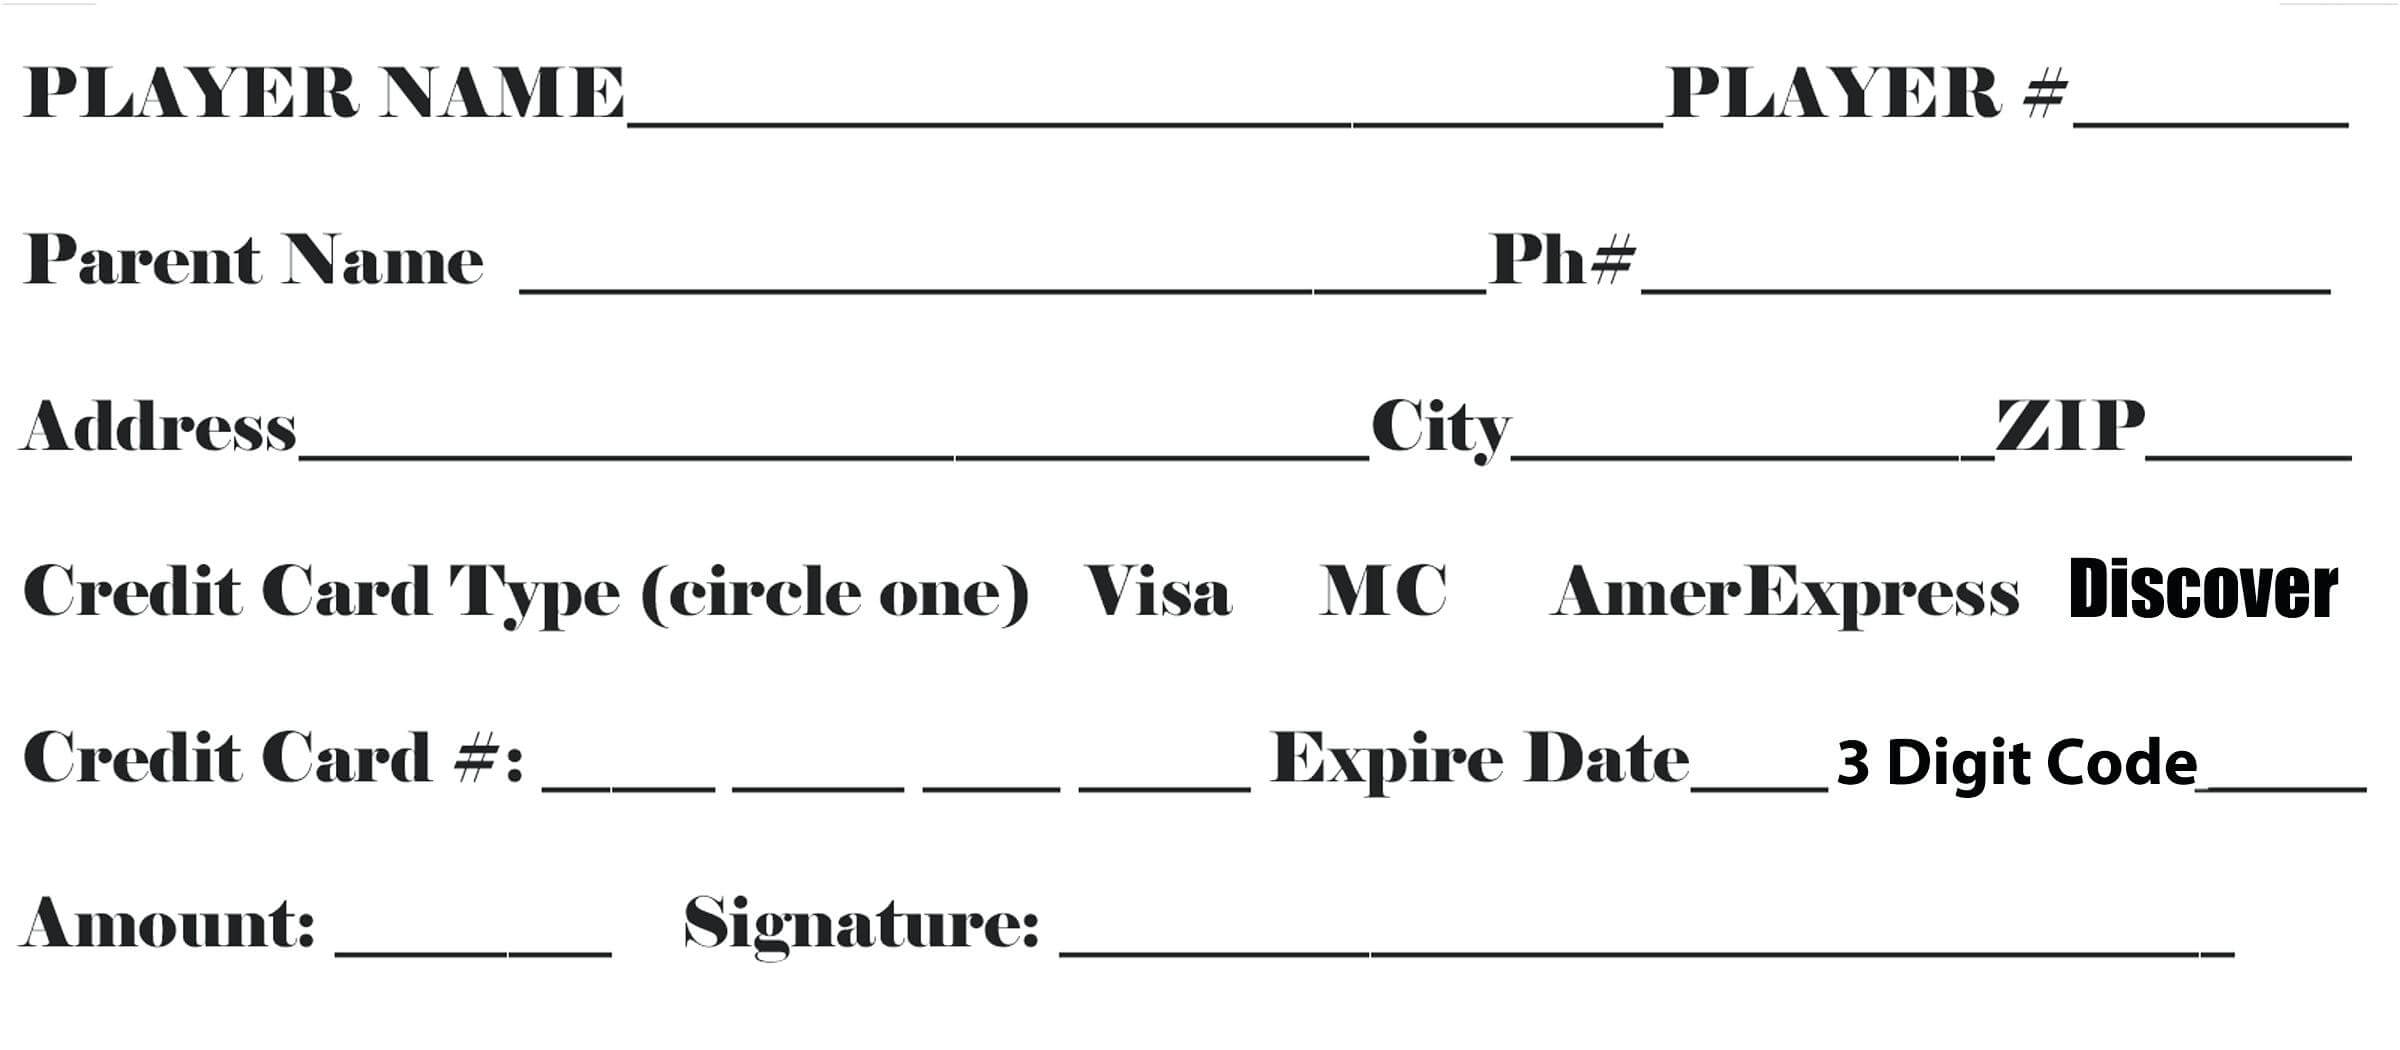 Deposit Forms Cash Credit Debit Or Financial Services Card In Credit Card Payment Slip Template